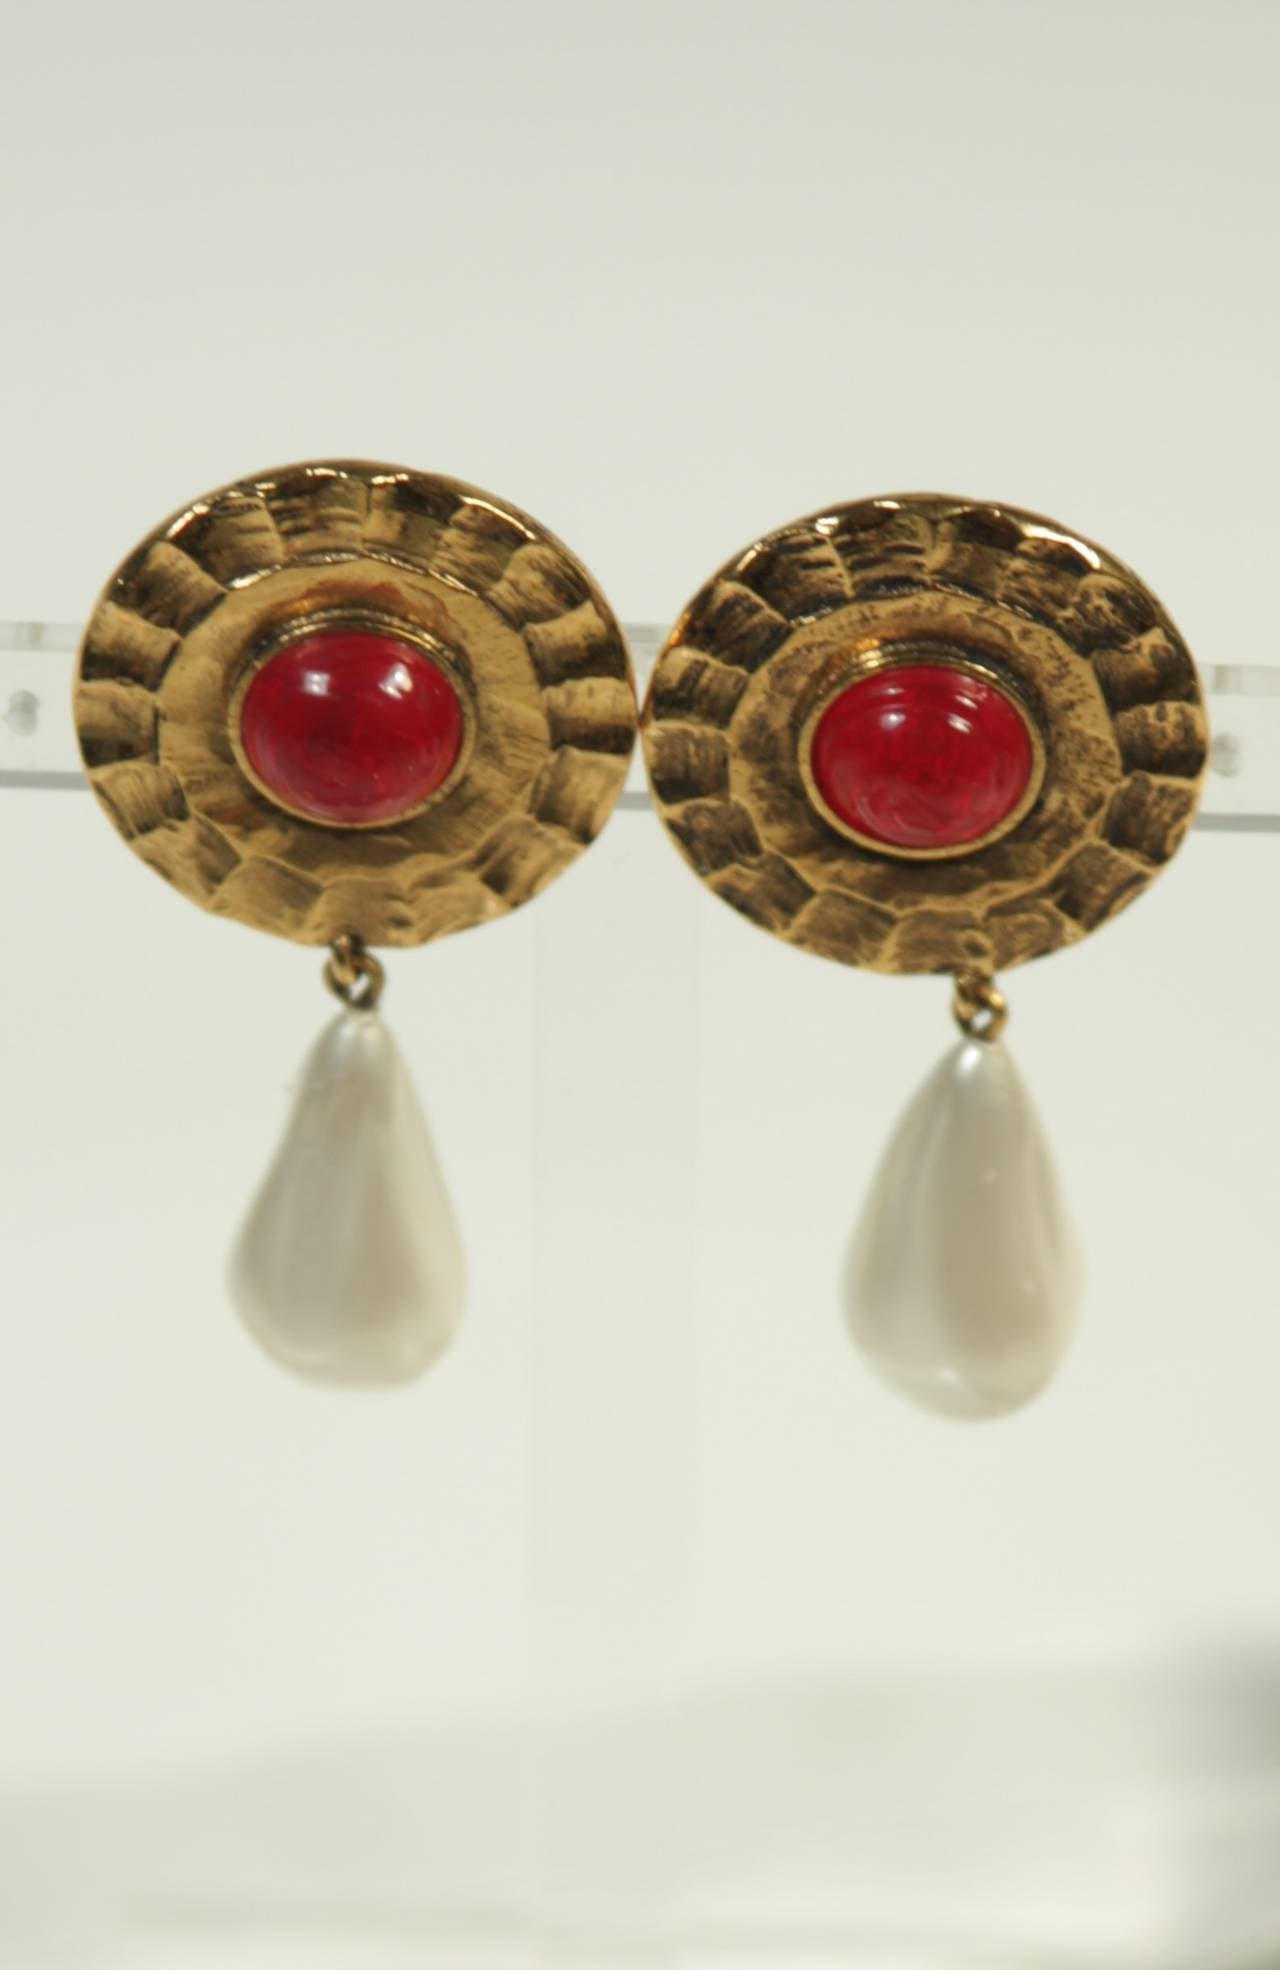 These vintage Chanel earrings are composed of a gold tone material and feature a pearl drop with red poured glass in the center. They are clip on style. In excellent condition, come with original box.
Signed: CHANEL, possibly by Robert Goossens as